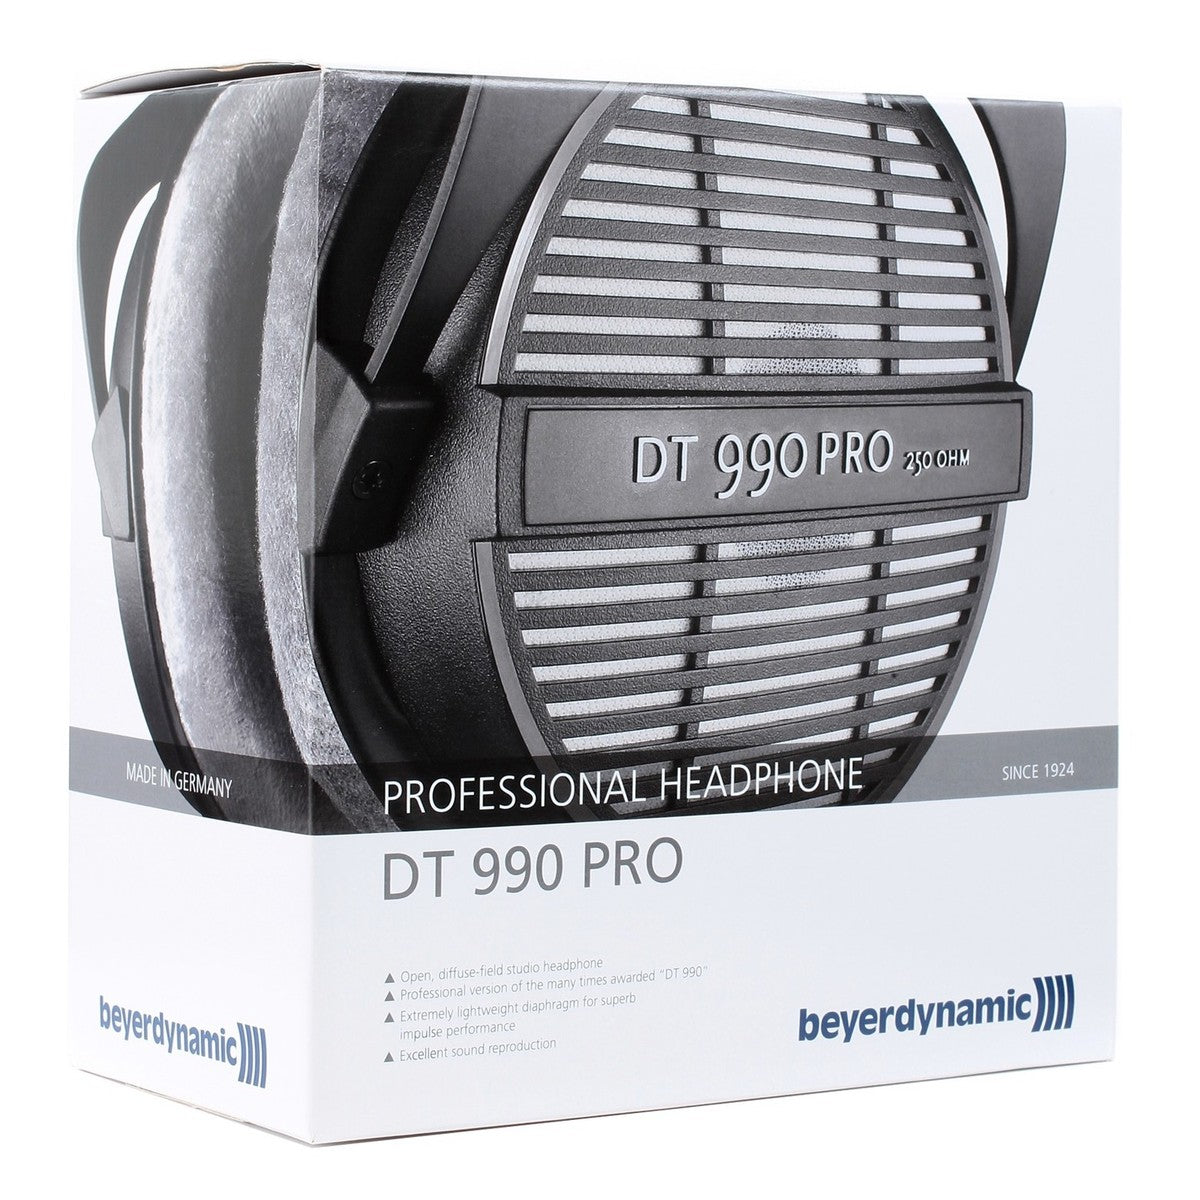 Beyerdynamic DT990 PRO 250ohm - Call to confirm stock